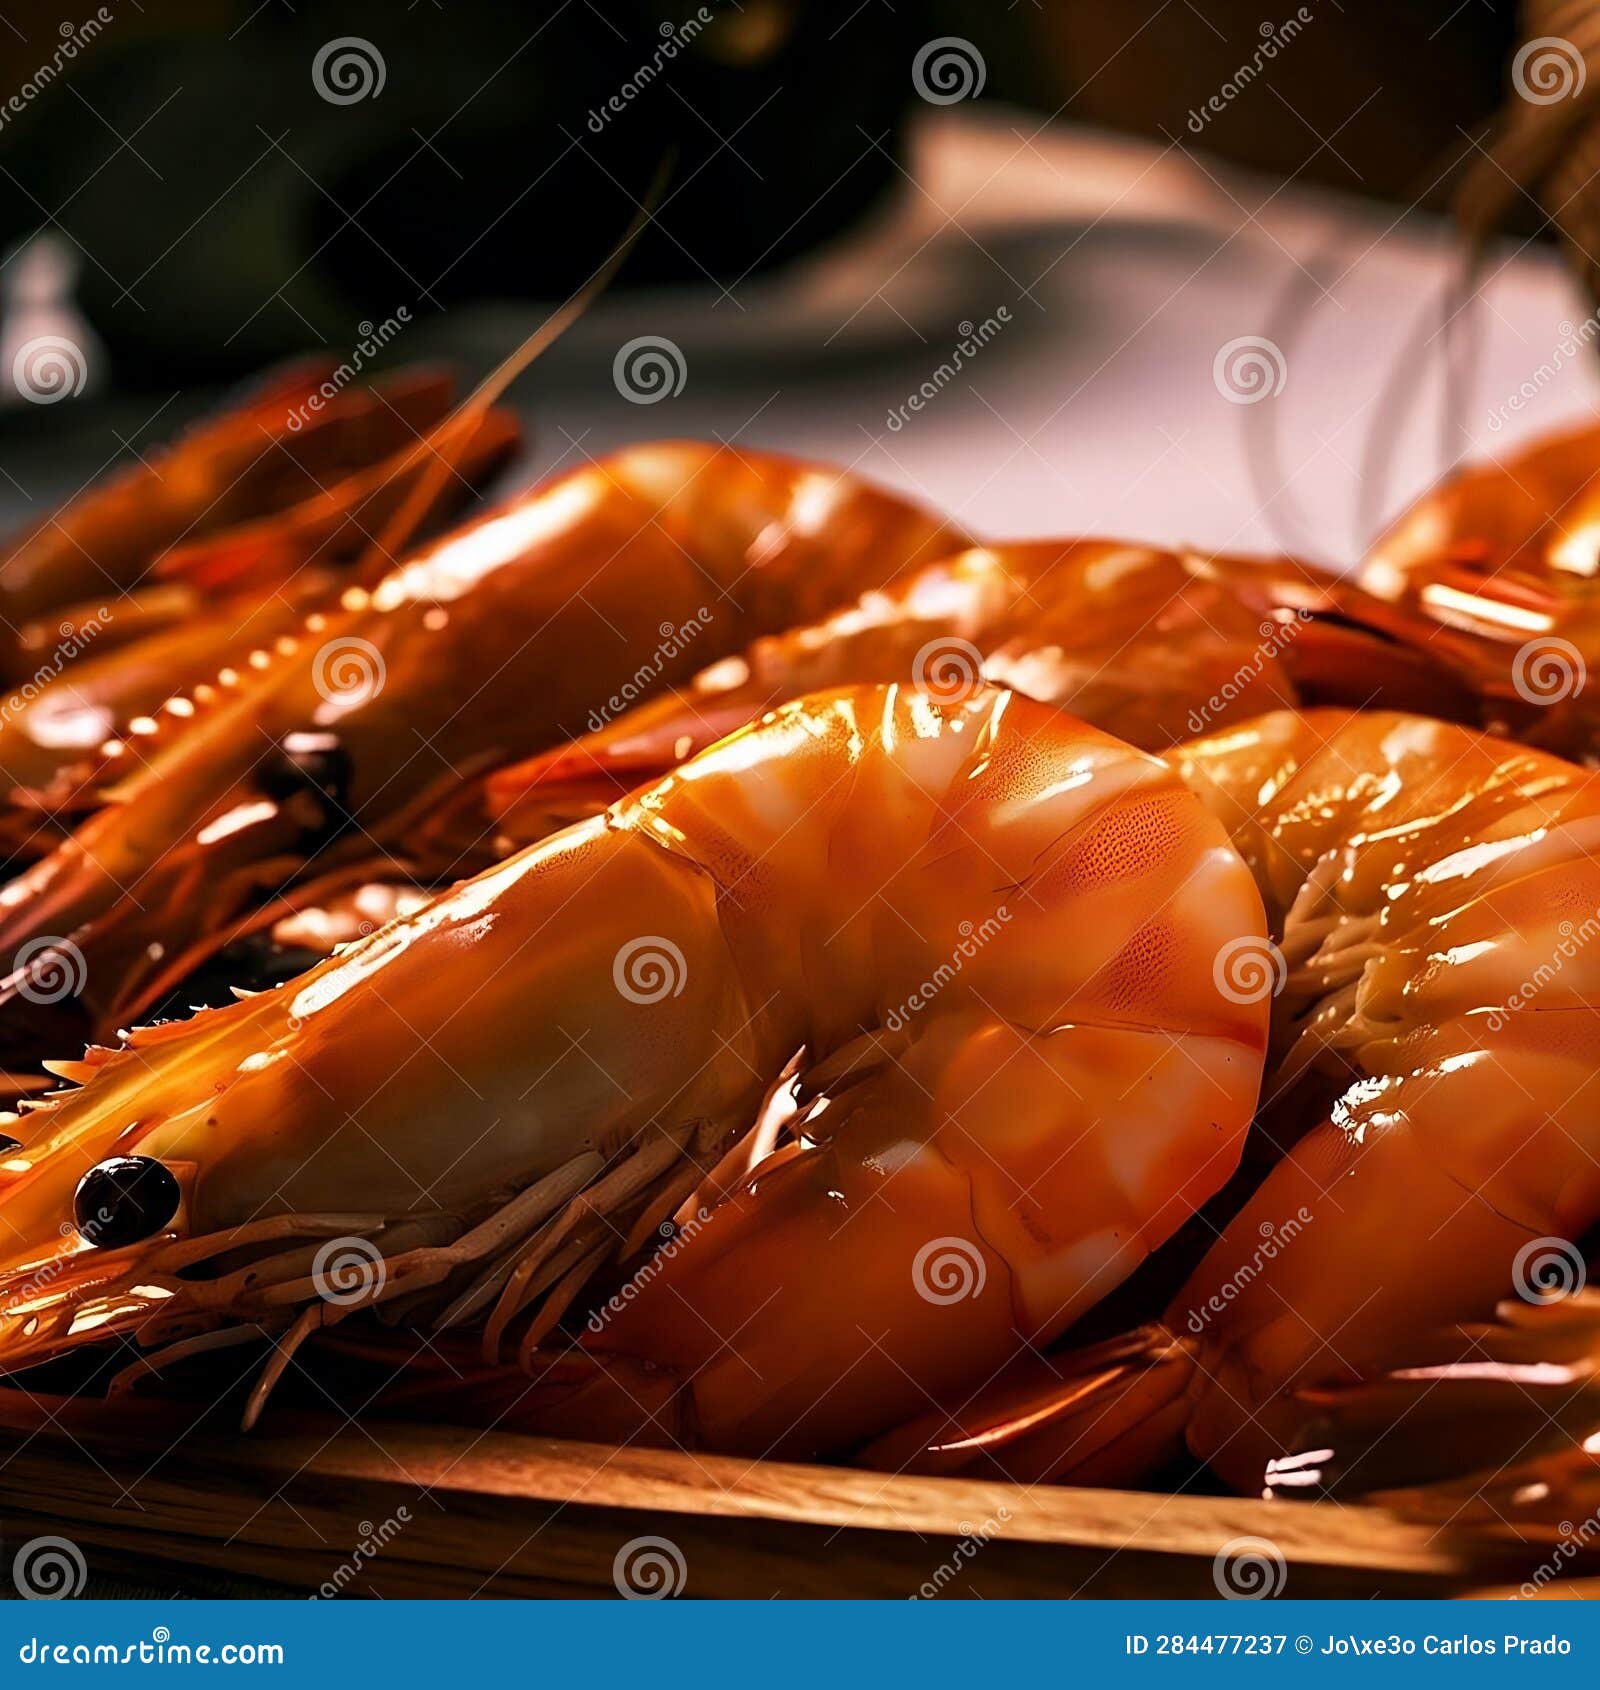 boiled shrimps on the plate